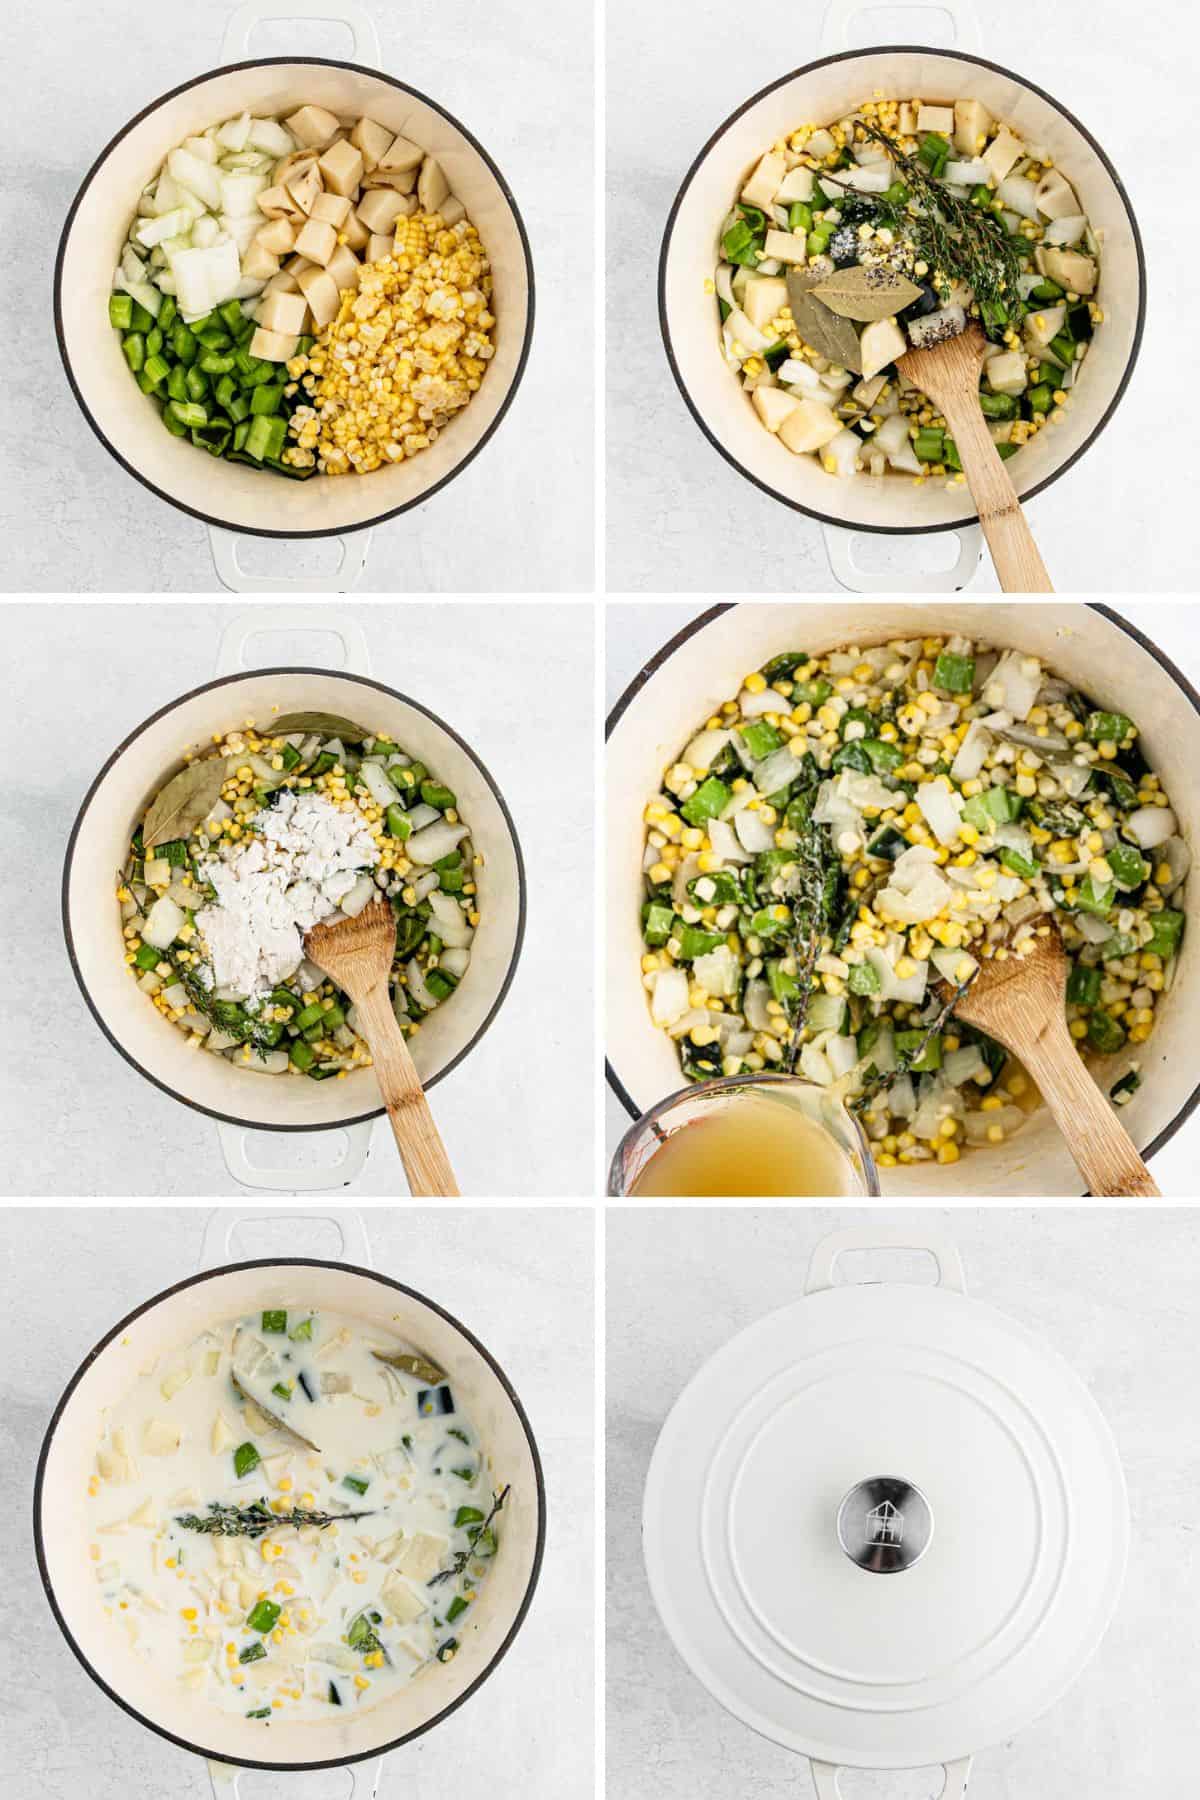 A collage of all the steps for adding the ingredients to make the soup.